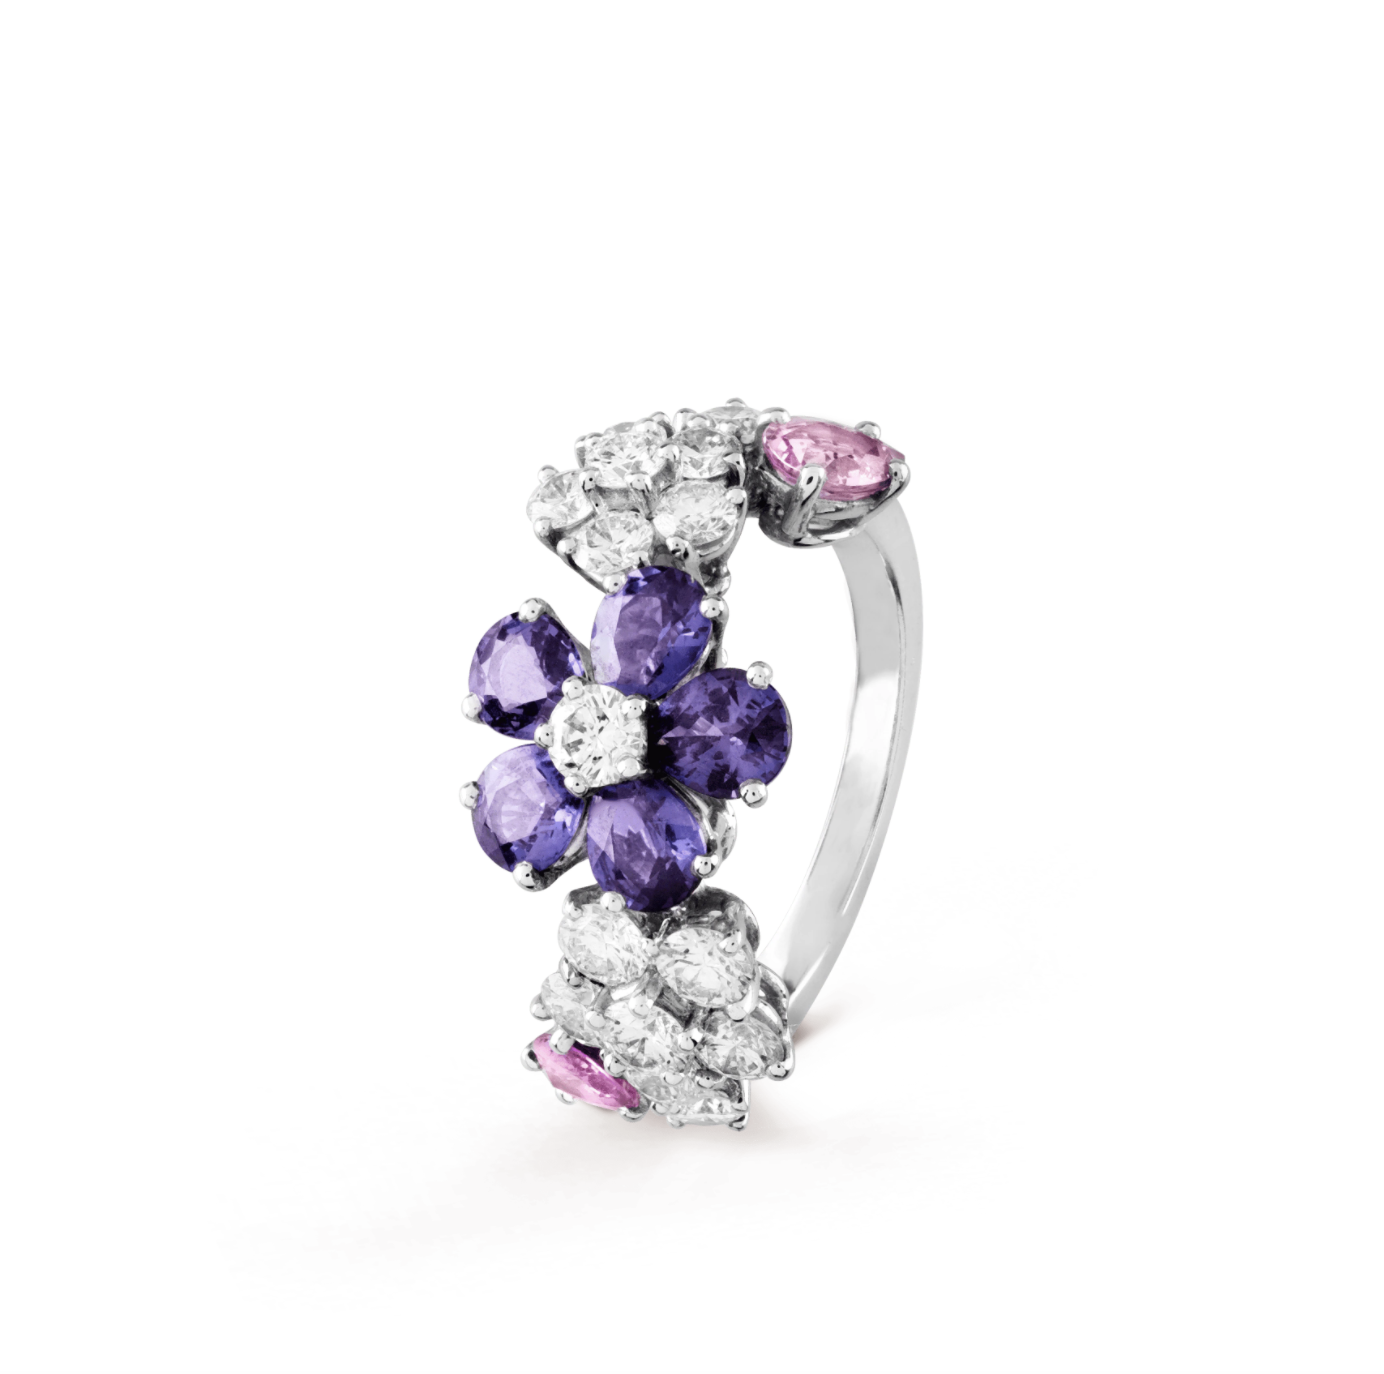 Colourful gems to wear in an alternative engagement ring: skip traditional  white diamonds for unique wedding jewellery, from Piaget's royal blue  cocktail rings to Ronald Abram's pink sapphires